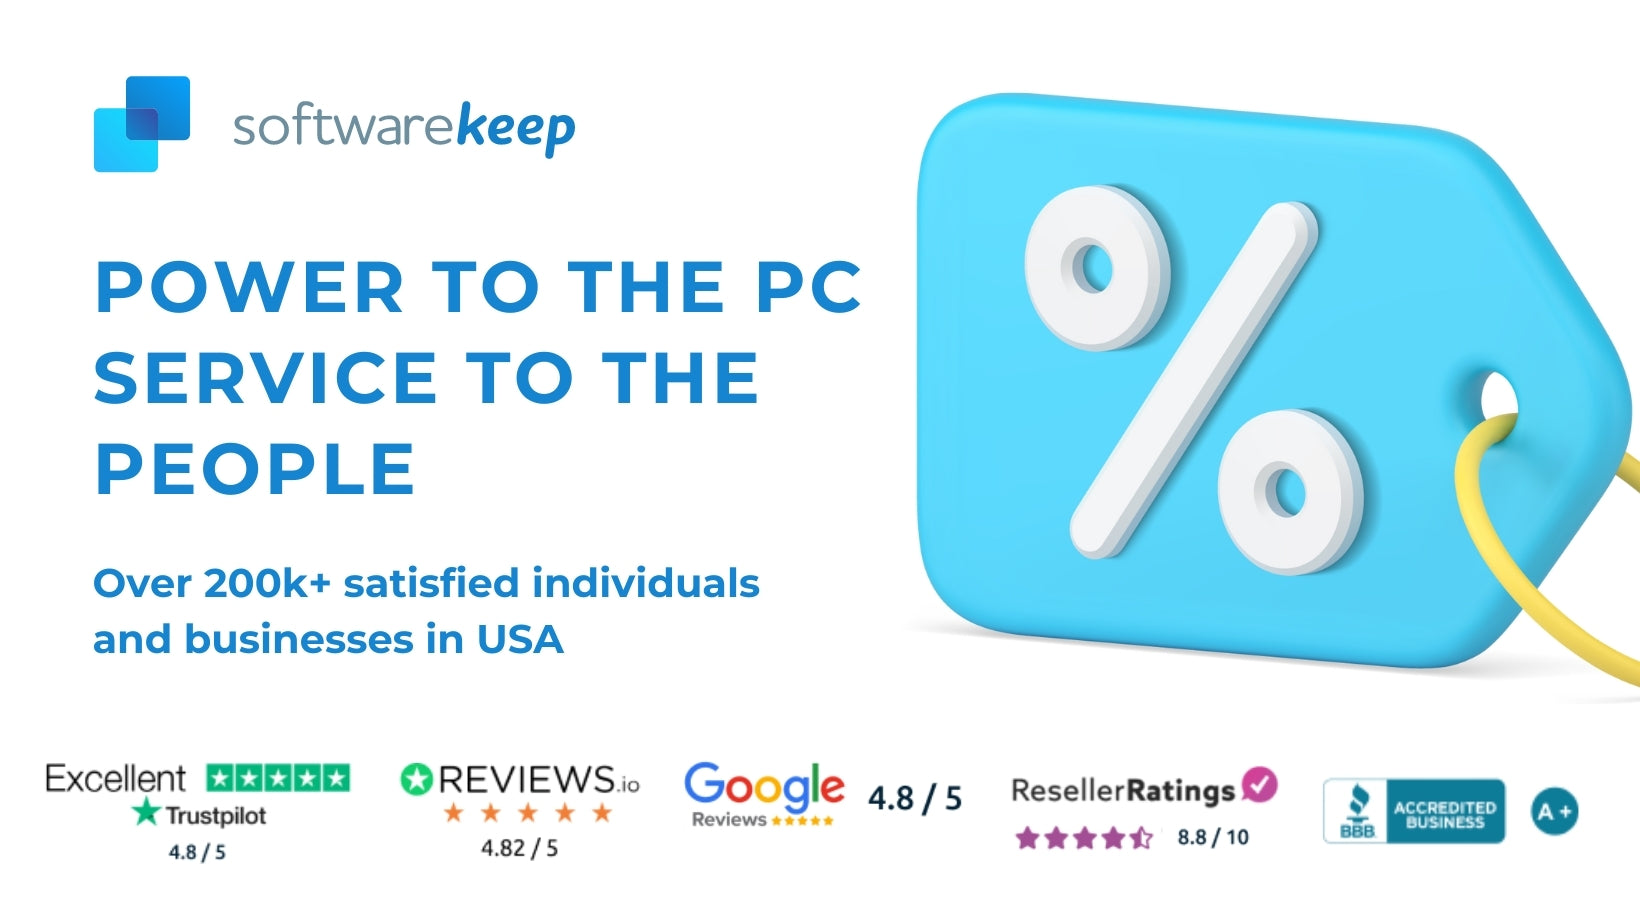 SoftwareKeep is the Best Software Provider in the Market